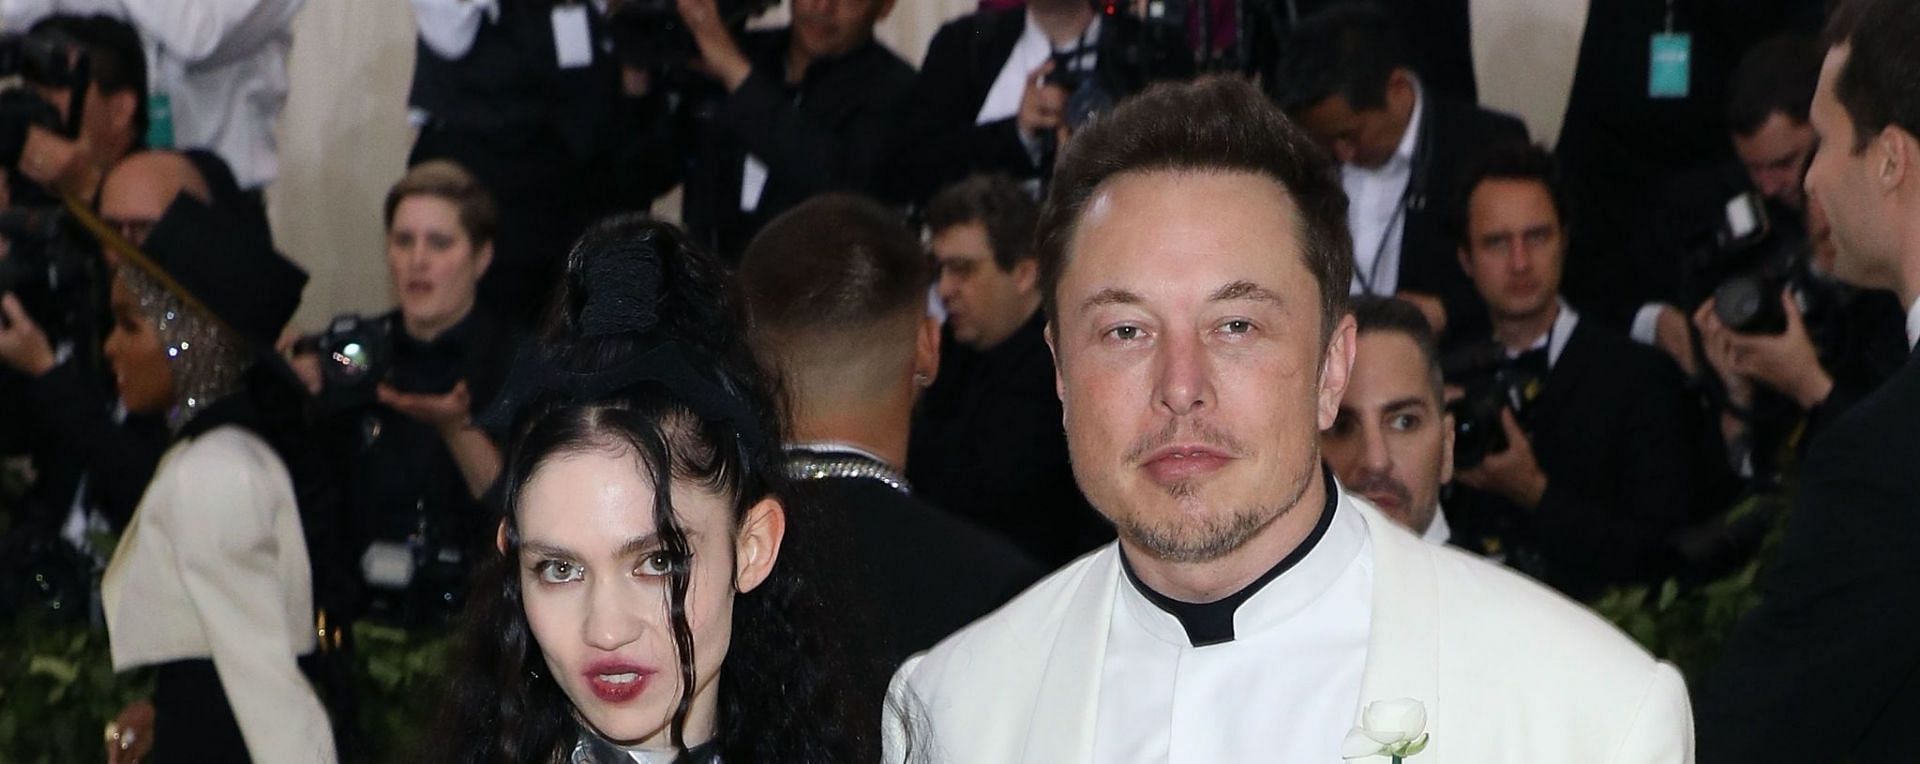 Grimes shares one child with SpaceX founder Elon Musk (Image via Taylor Hill/Getty Images)